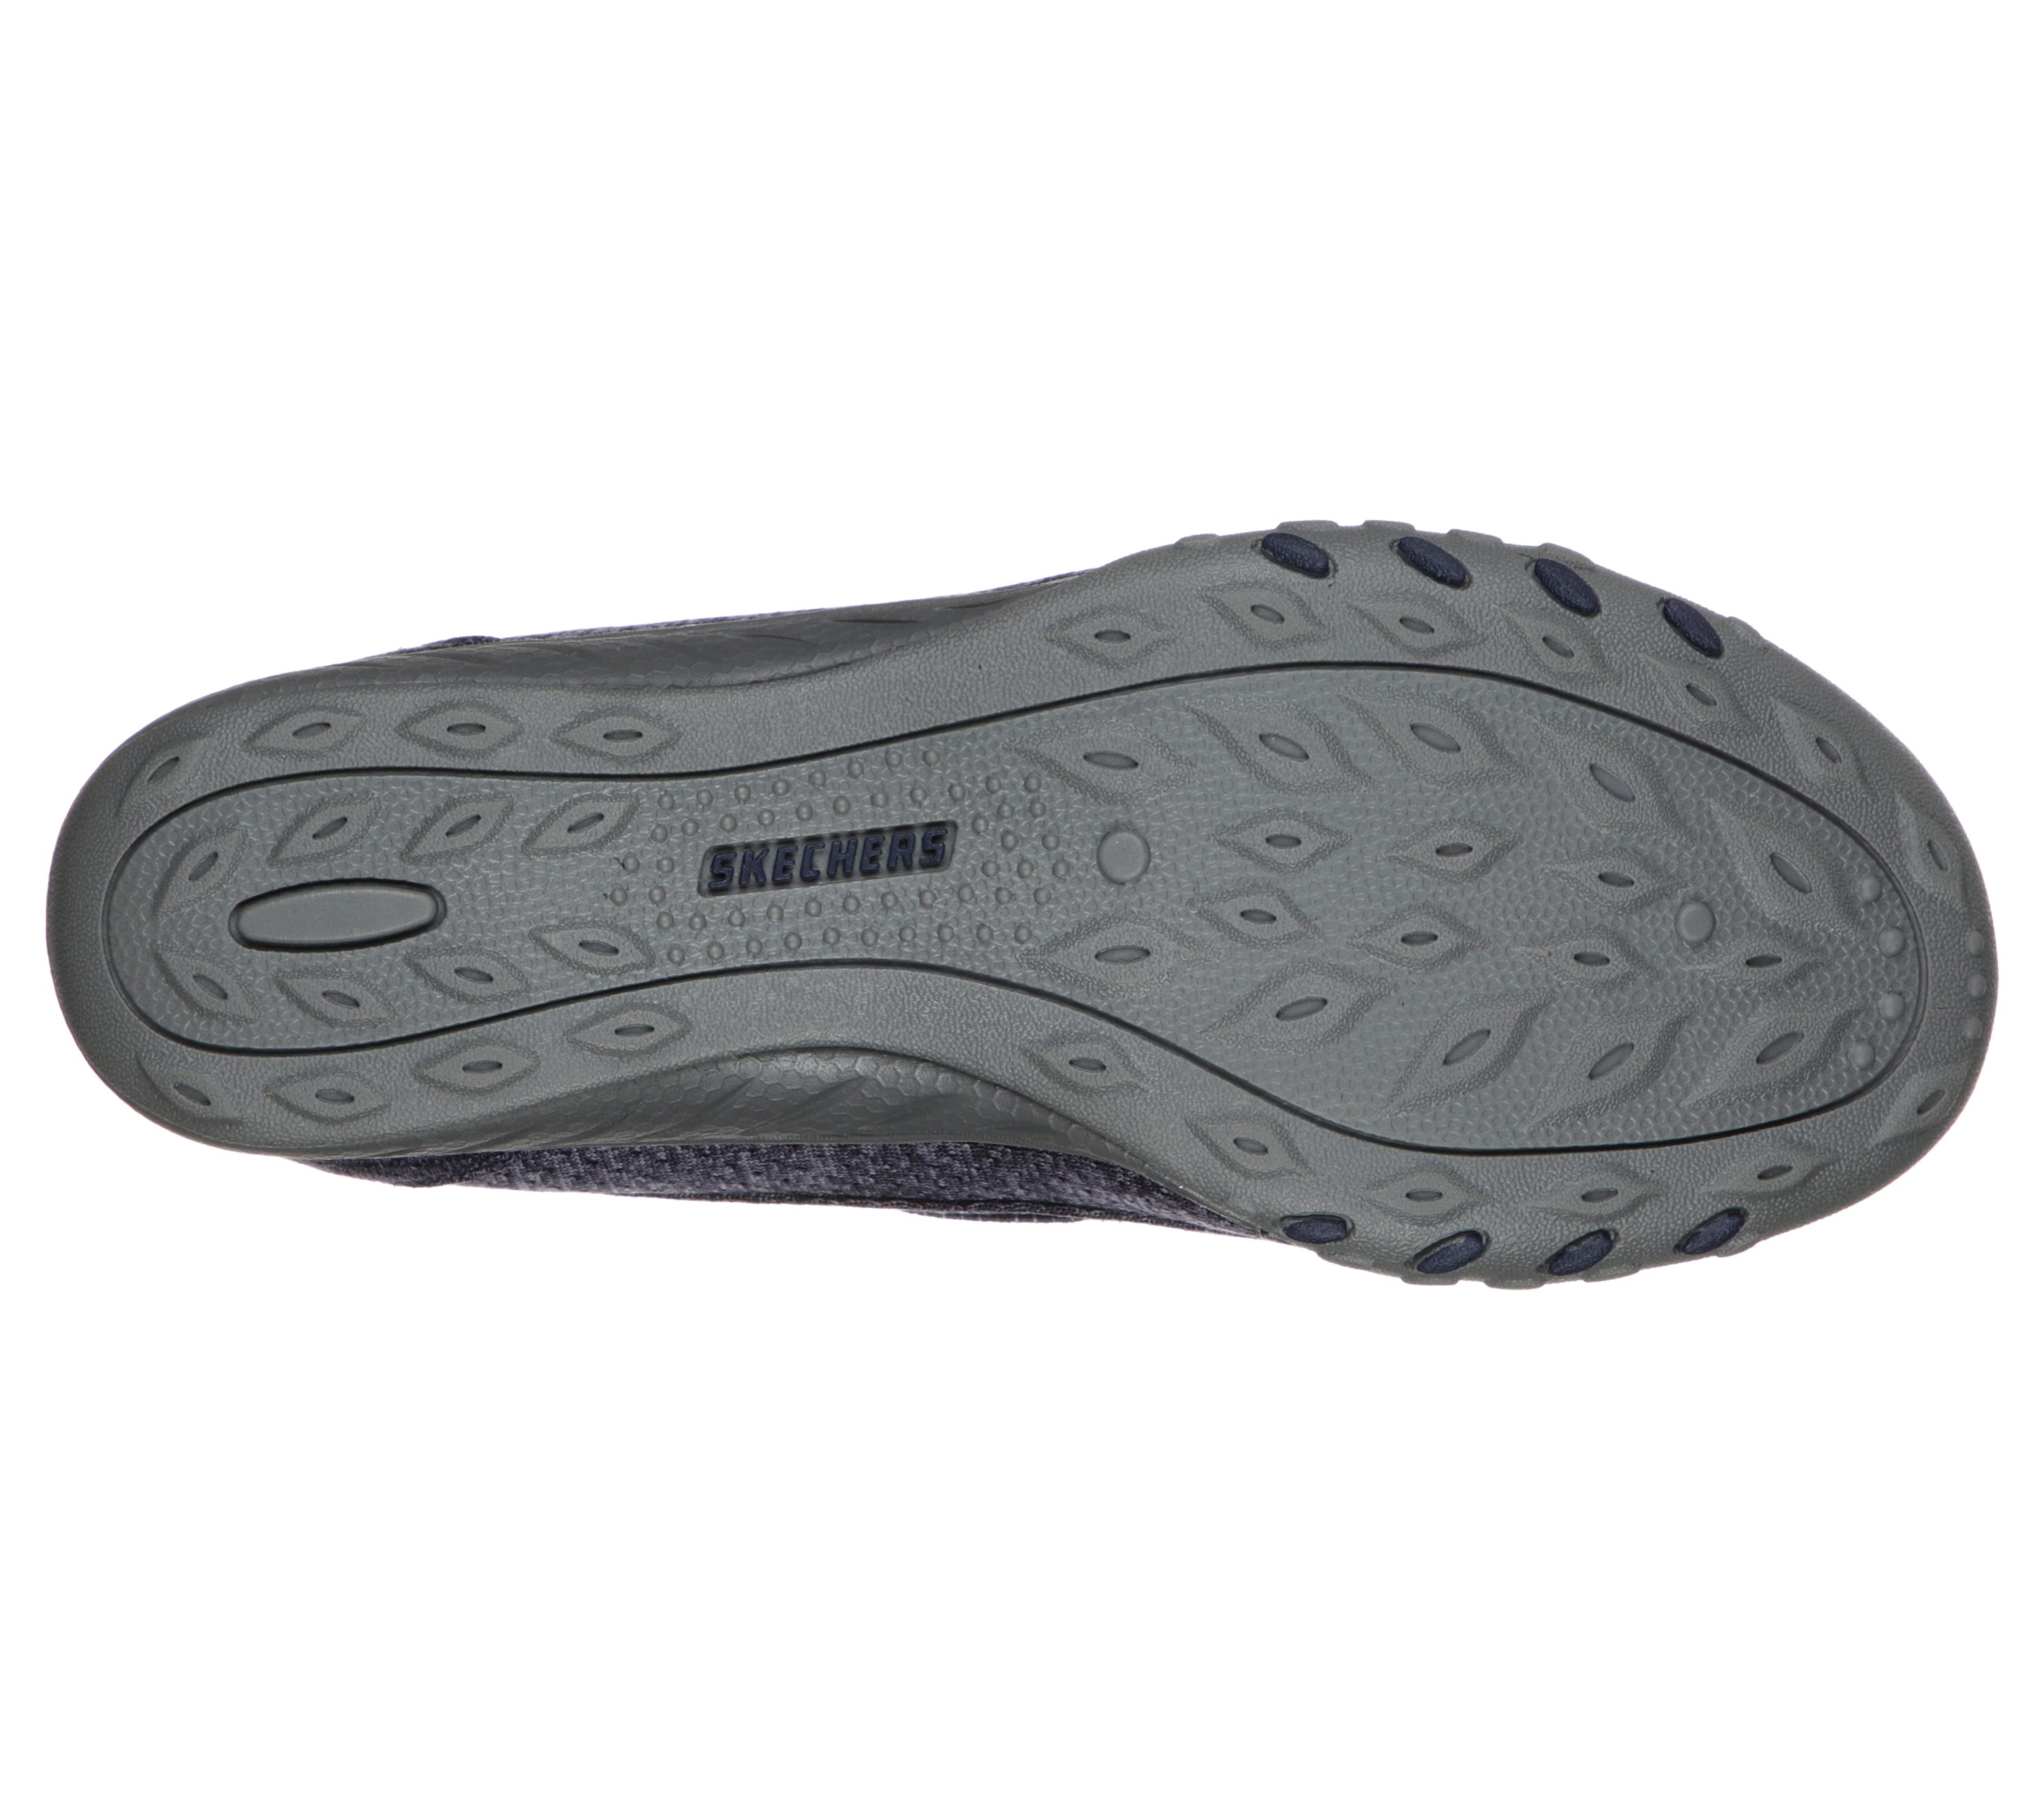 Shop Relaxed Breathe Easy - Good Influence | SKECHERS